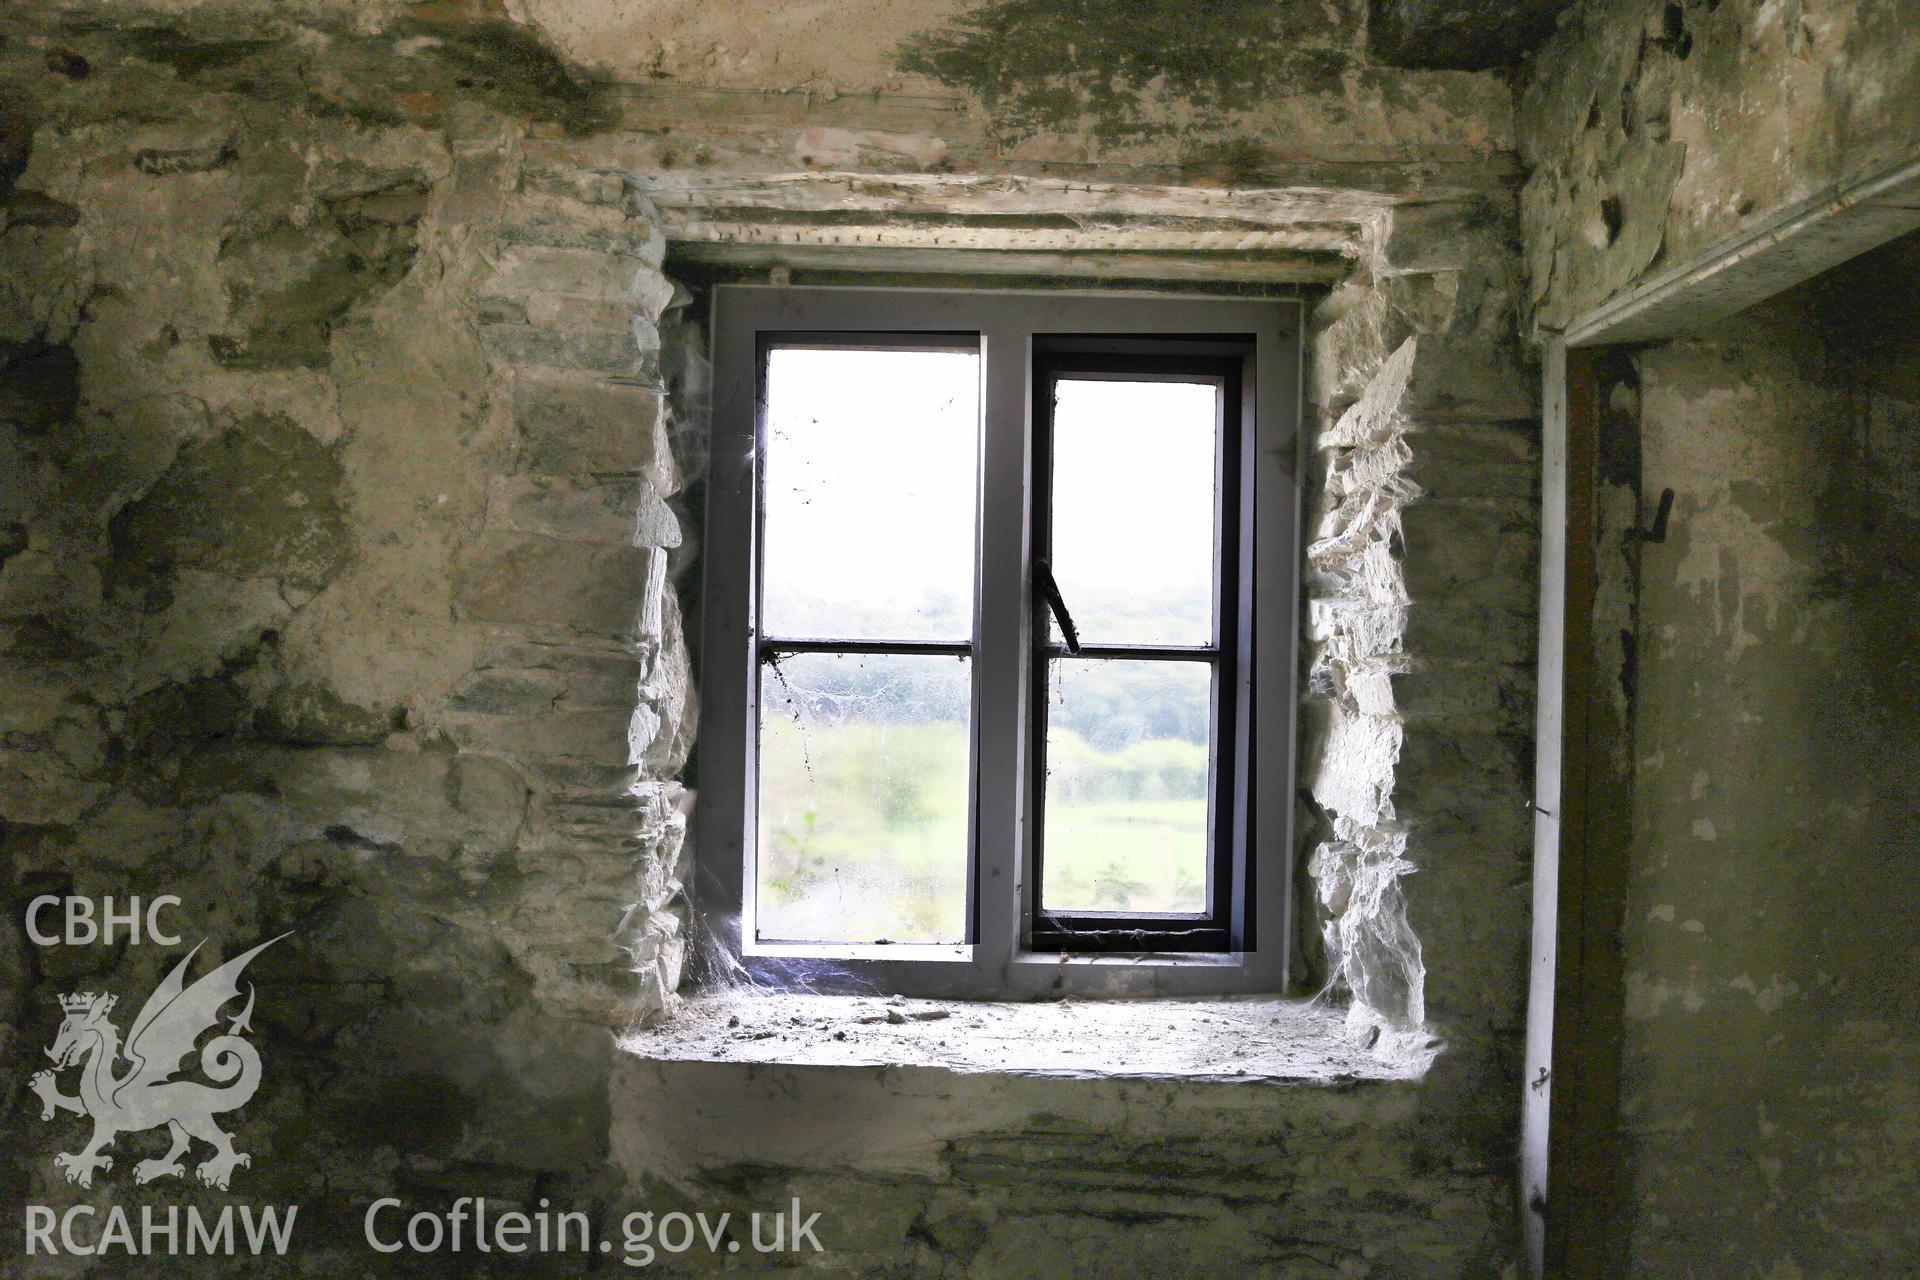 Photograph showing interior view of barn and cottage window at Maes yr Hendre, taken by Dr Marian Gwyn, 6th July 2016. (Original Reference no. 0078)